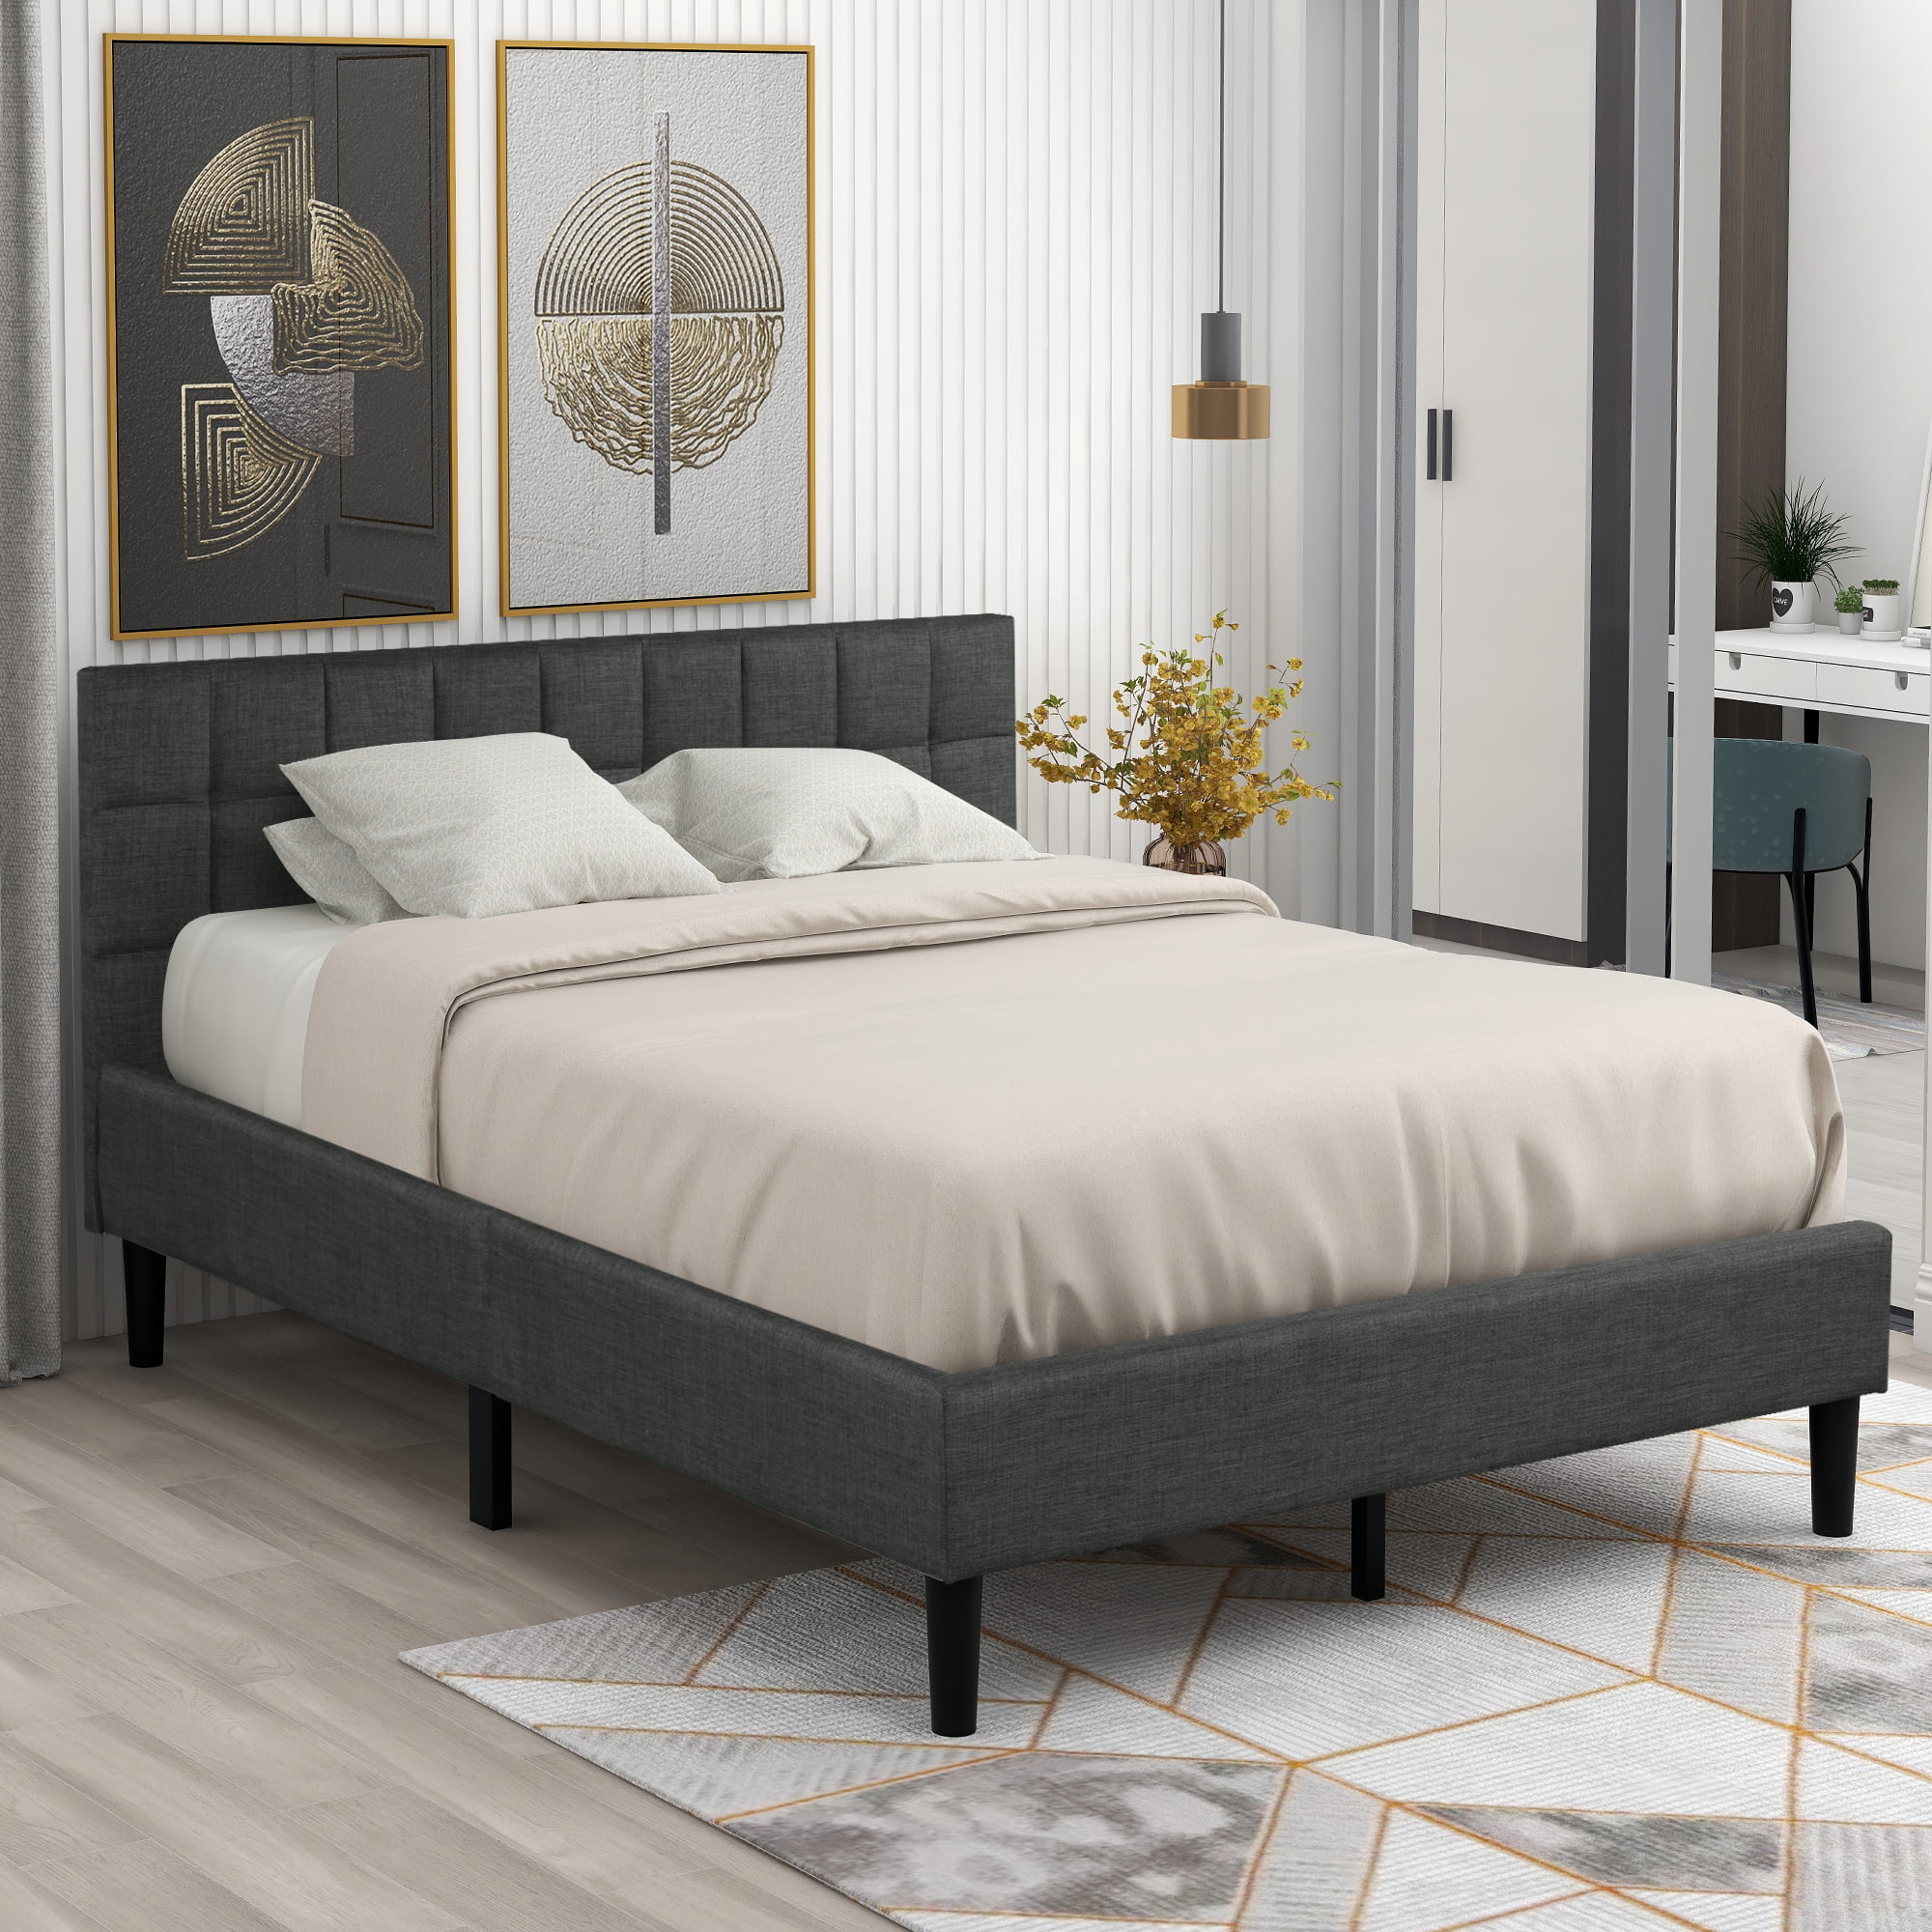 Clearance! Queen Bed Frame with Headboard, Modern Fabric Upholstered